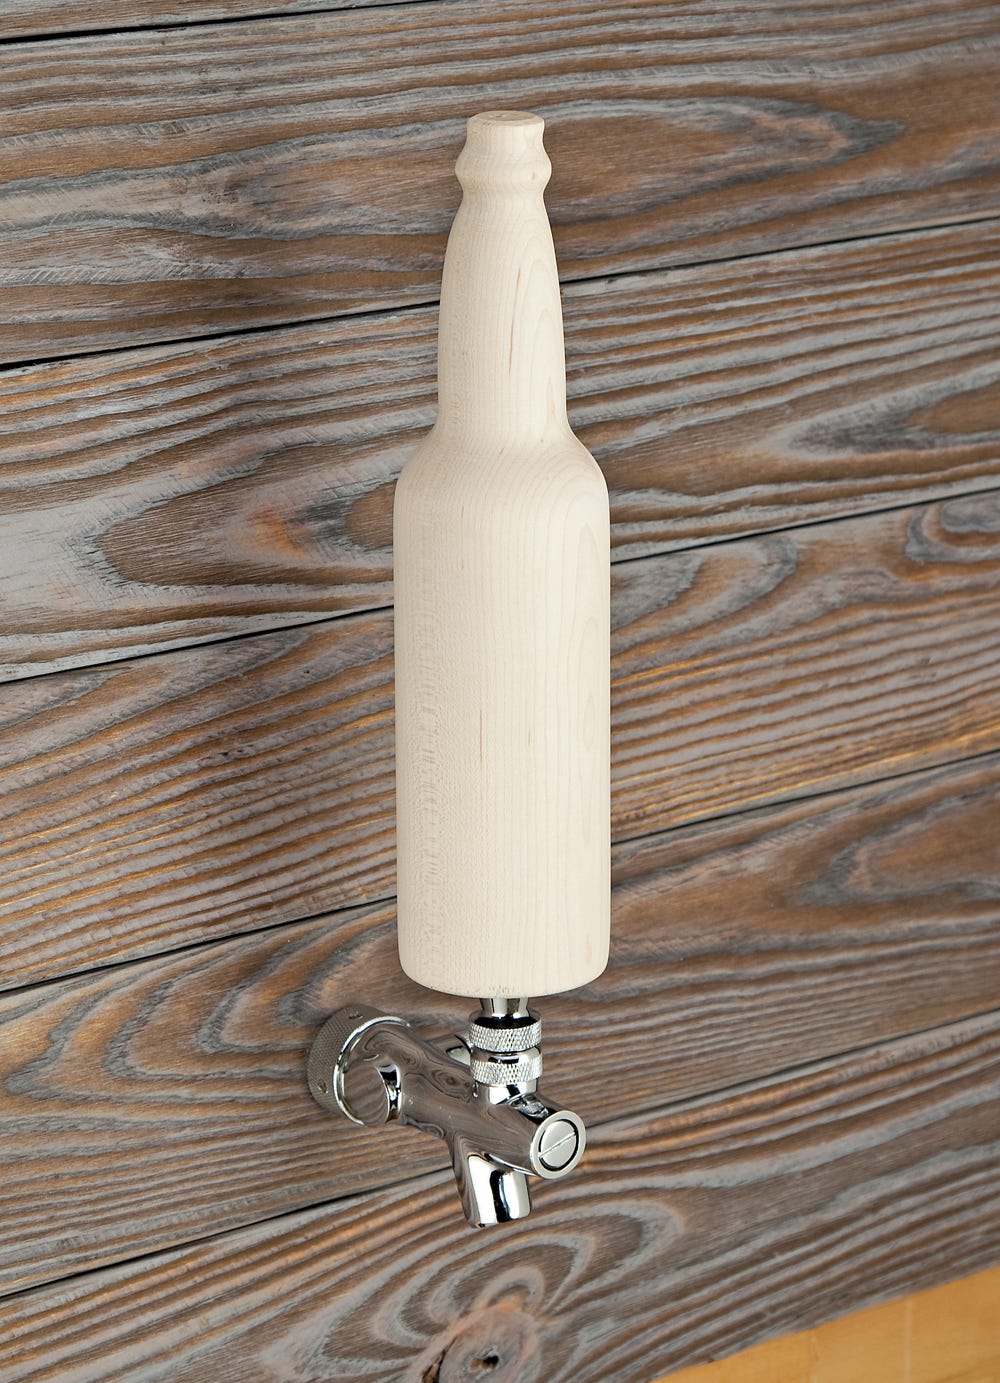 Rockler Launches Line Of Beer Tap Hardware